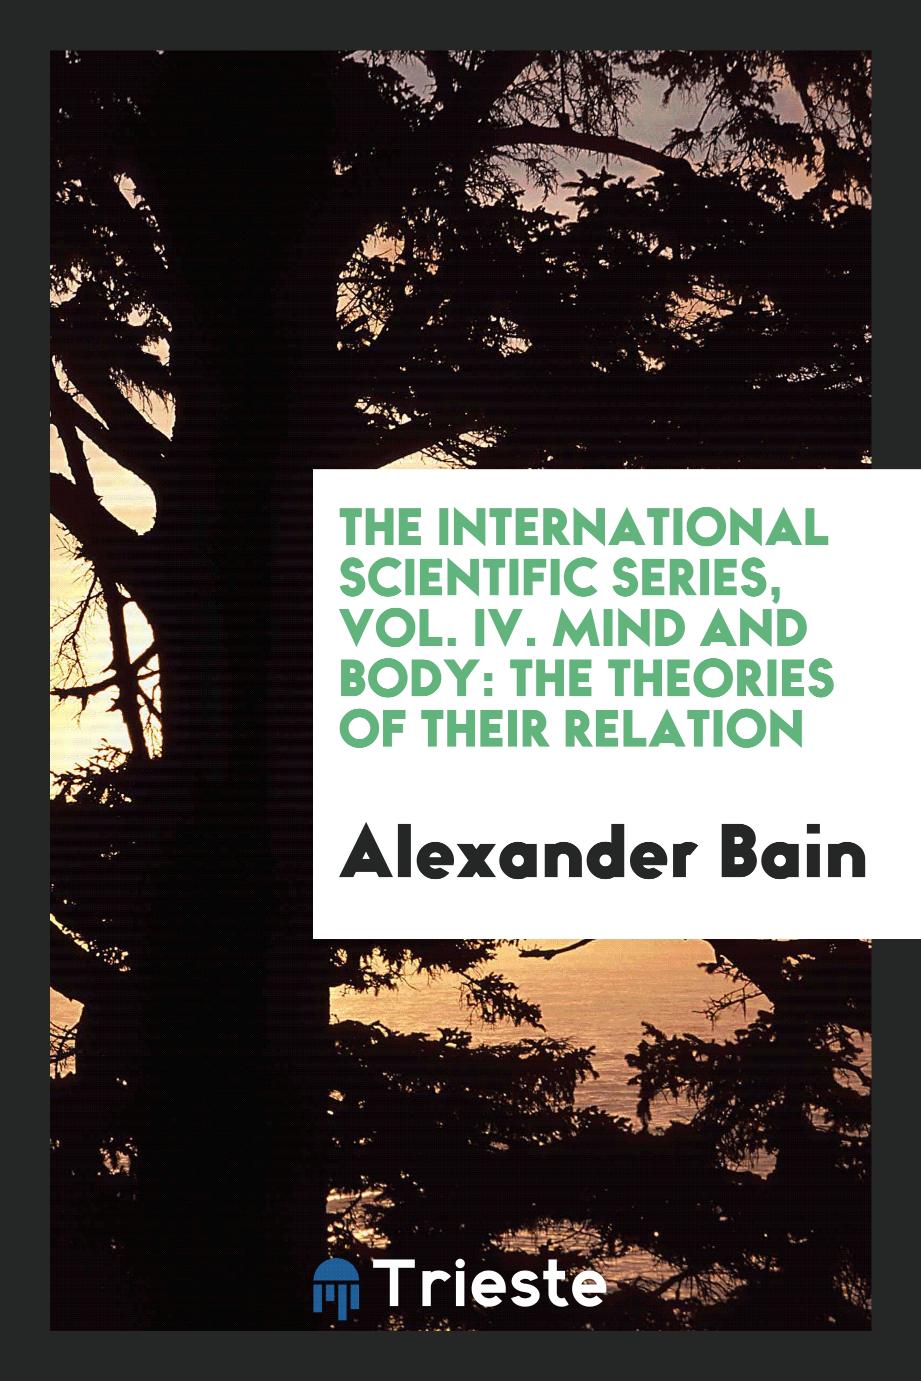 The International Scientific Series, Vol. IV. Mind and Body: The Theories of Their Relation